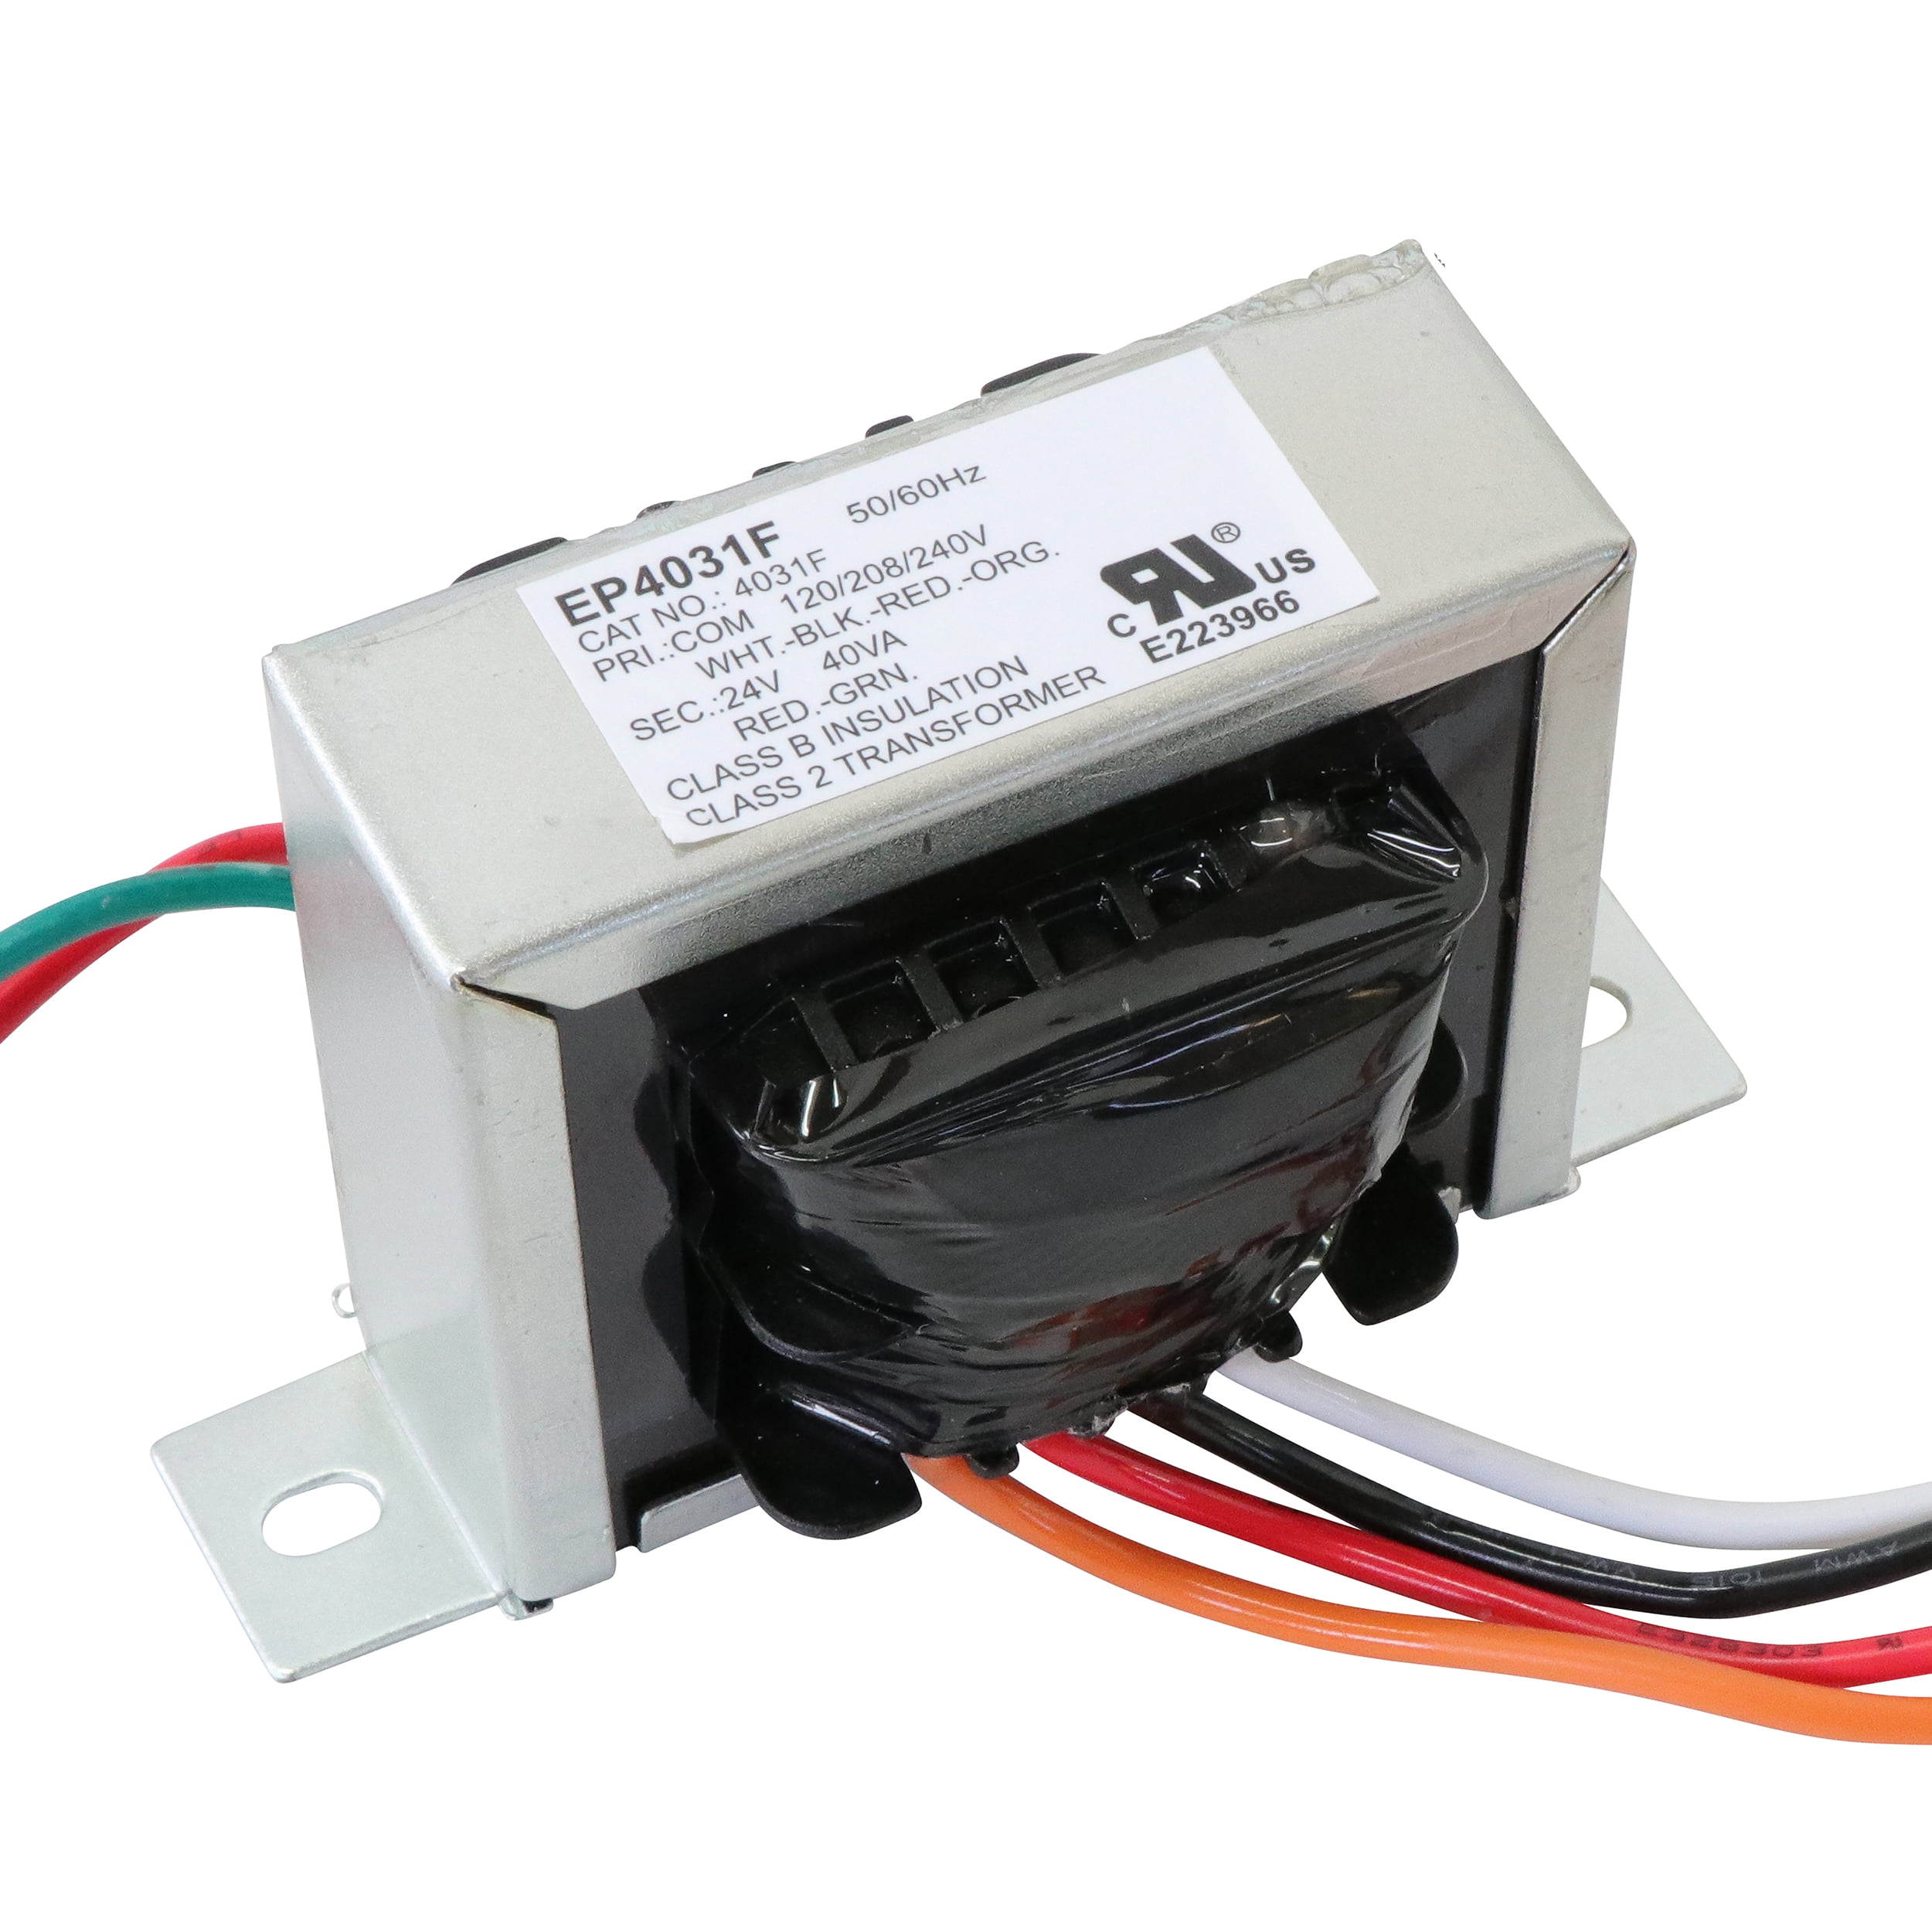 Packard Replacement 40va Transformer Input out 24v PF40224 for sale online 